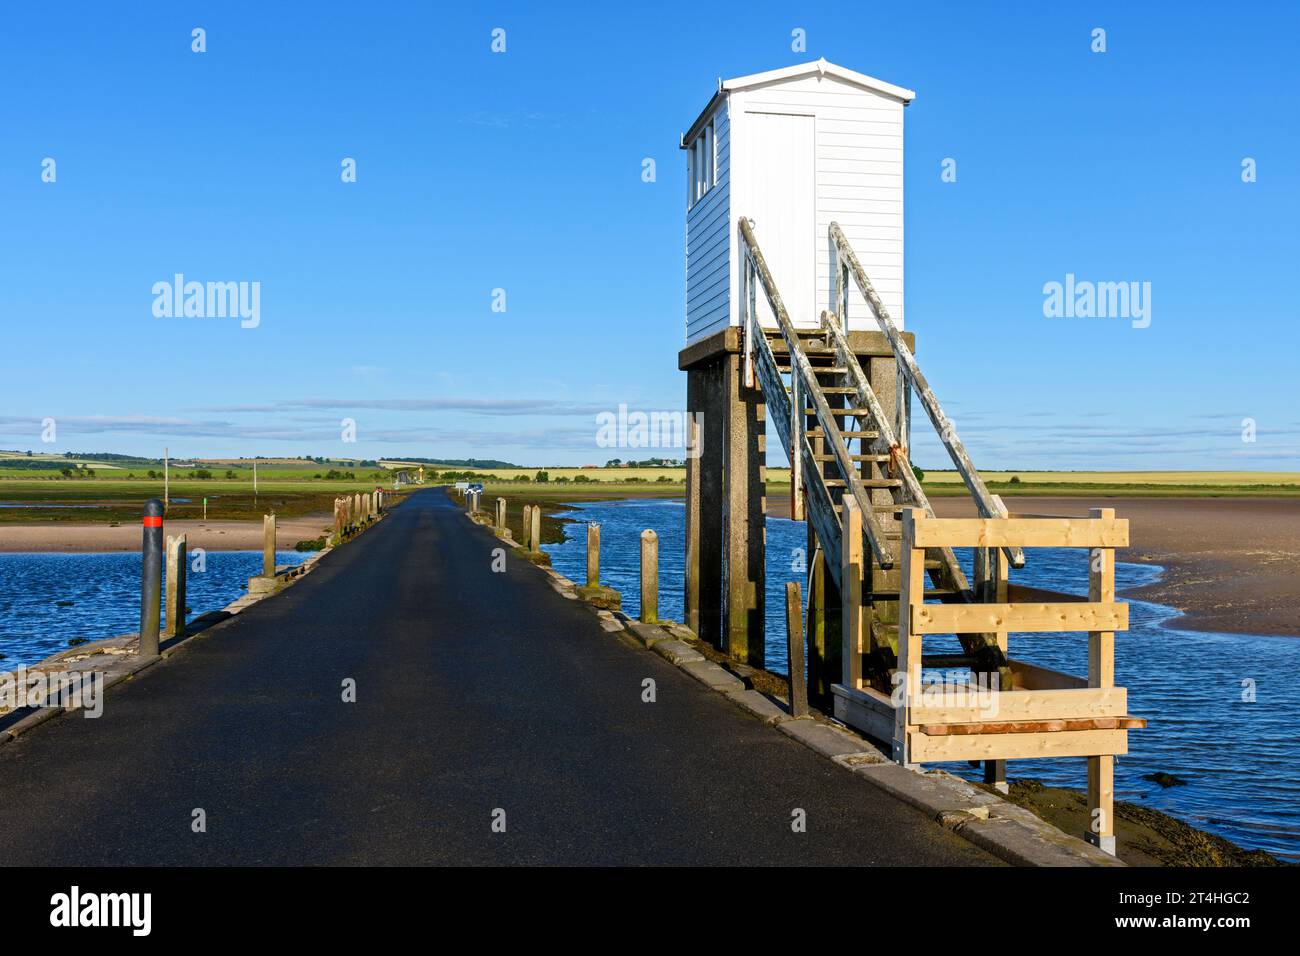 The Lindisfarne Causeway to Holy Island and the emergency refuge hut. The causeway is submerged twice a day by the tides.  Northumberland, England, UK Stock Photo